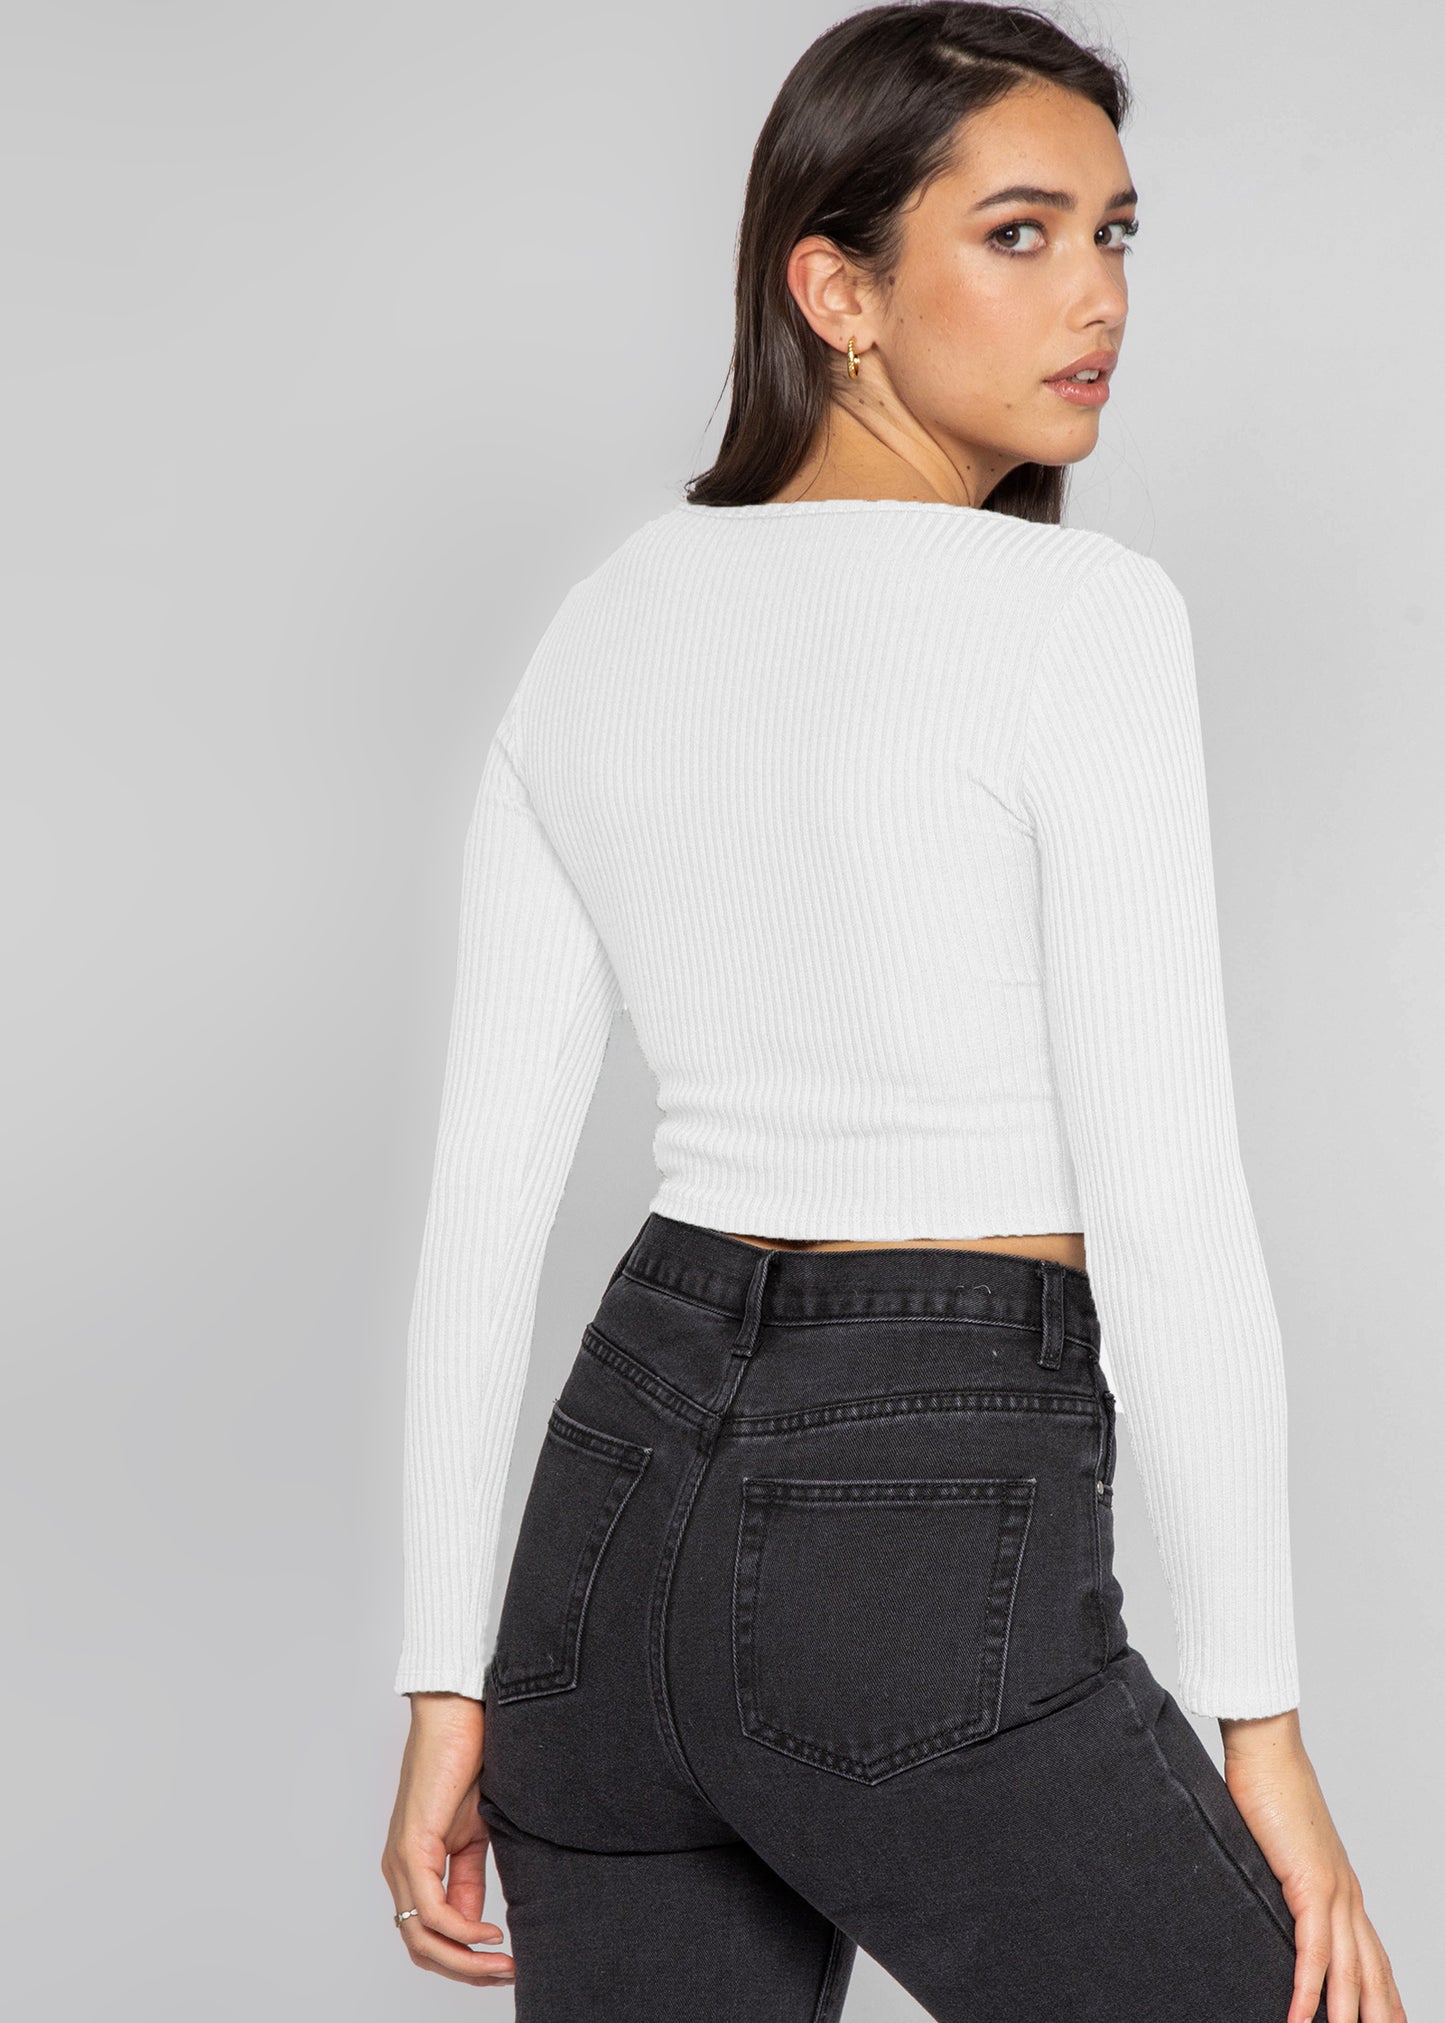 Rib knit ruched crop jumper in white